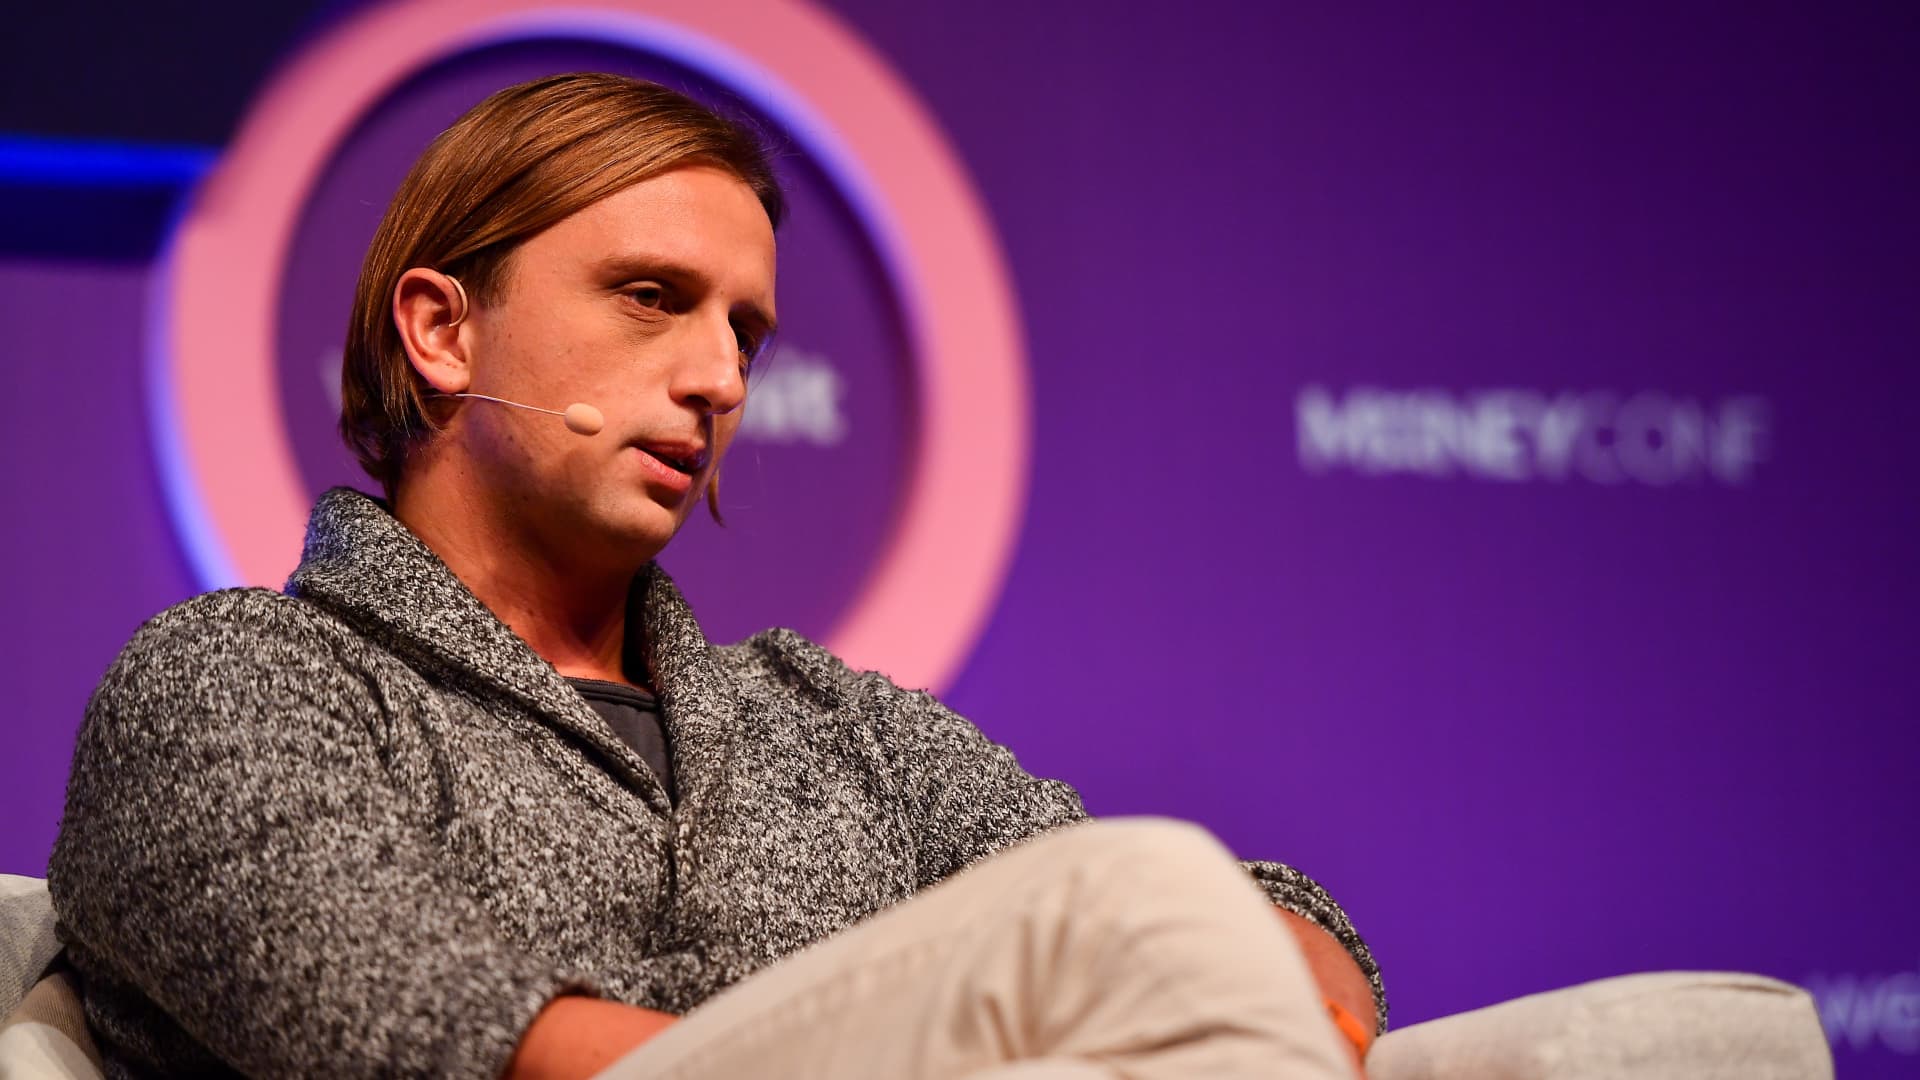 Fintech firm Revolut takes aim at Stripe with payment software for businesses